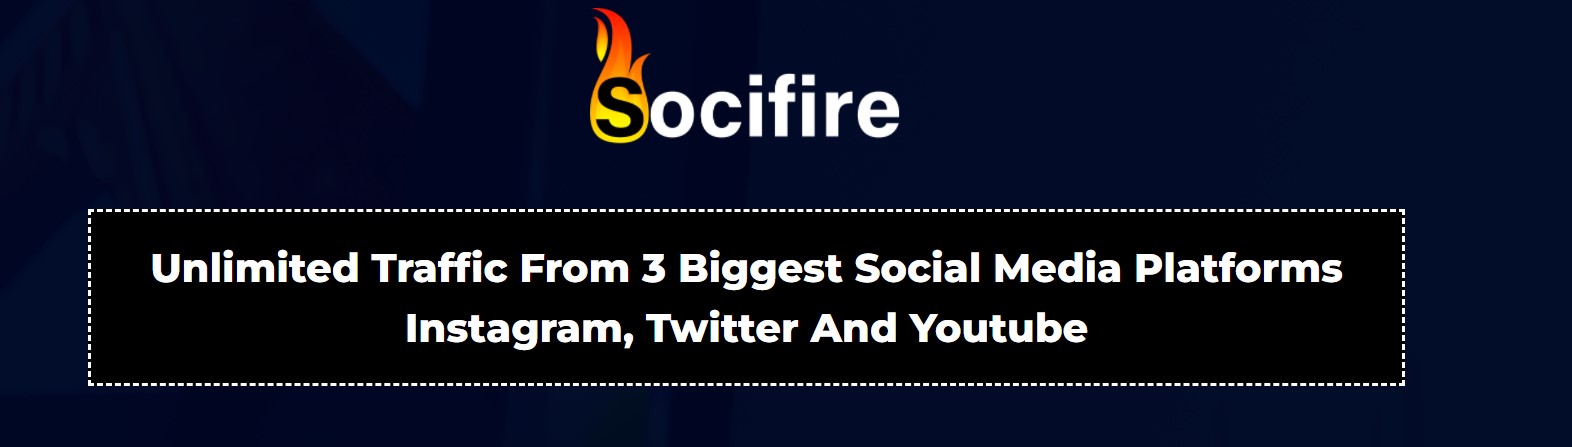 socifire review